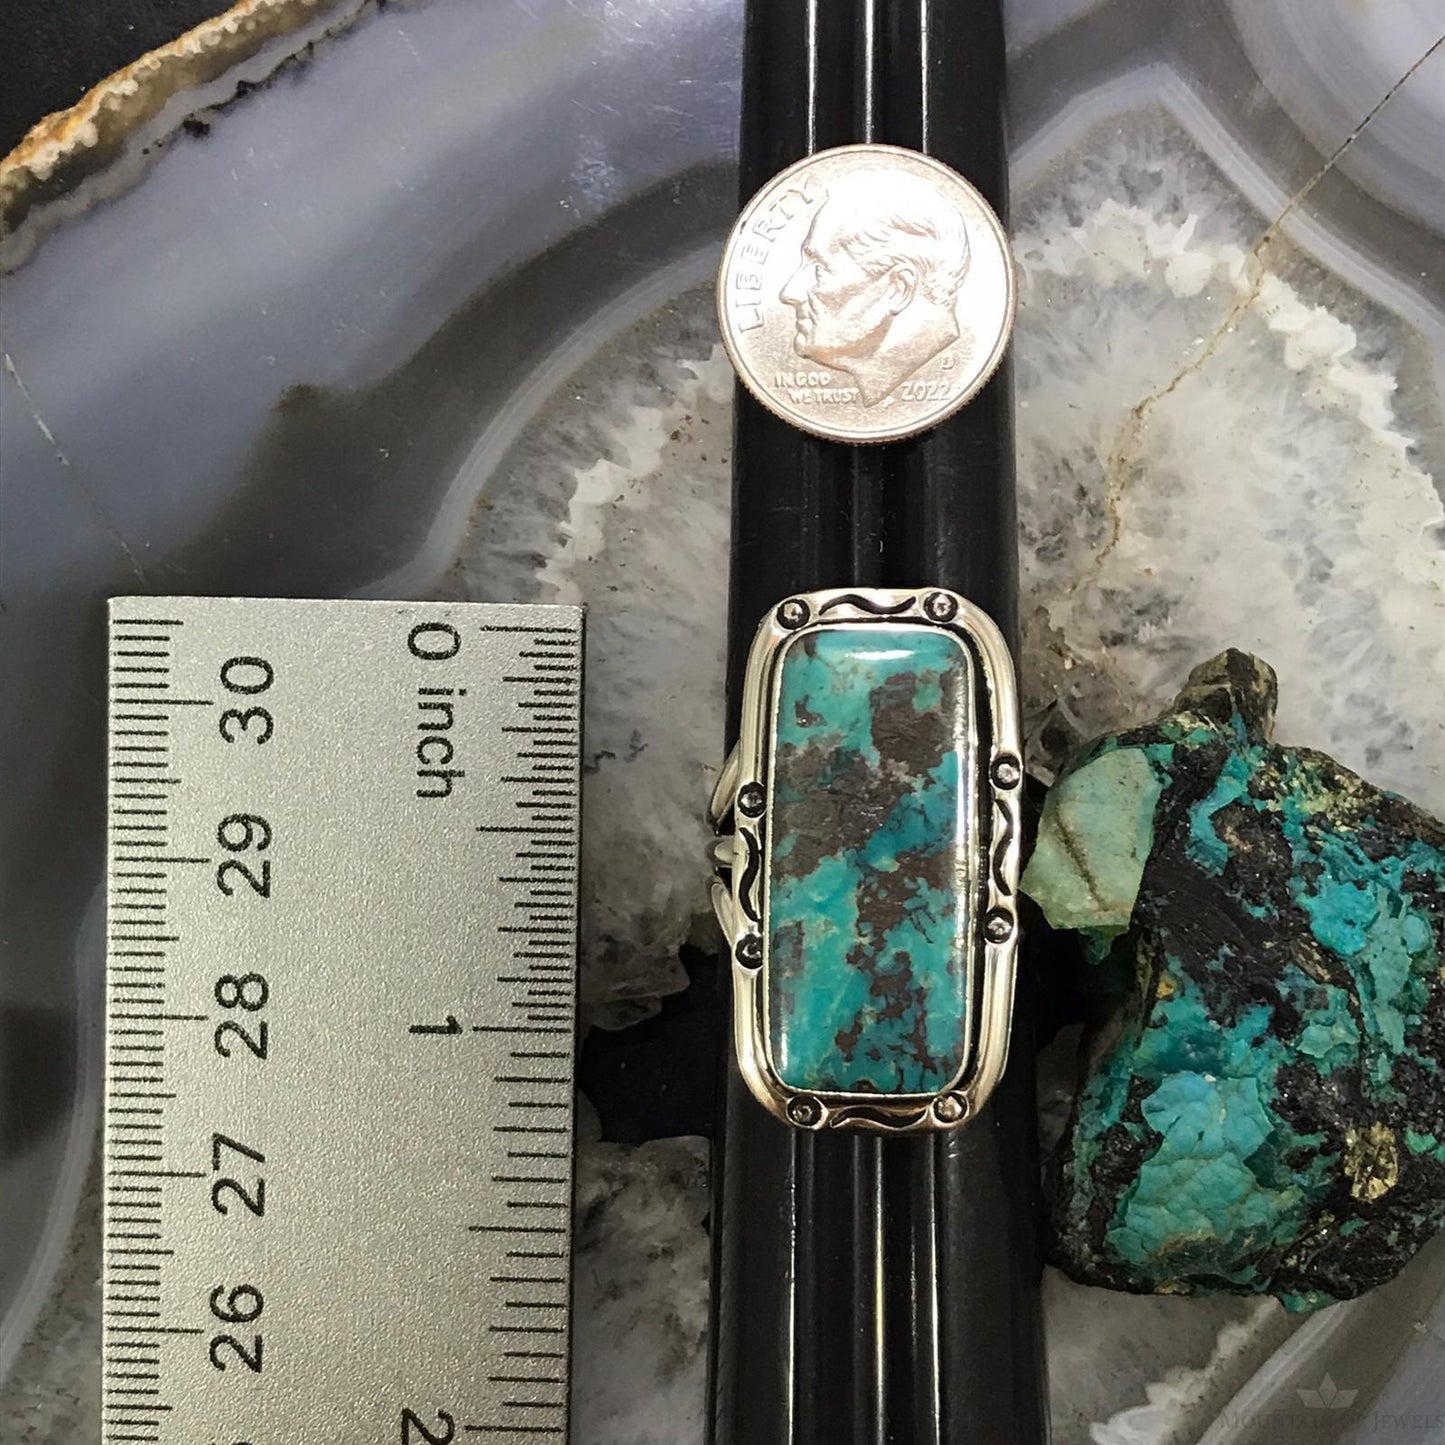 Native American Sterling Silver Turquoise w/Matrix Bar Ring Size 9 For Women